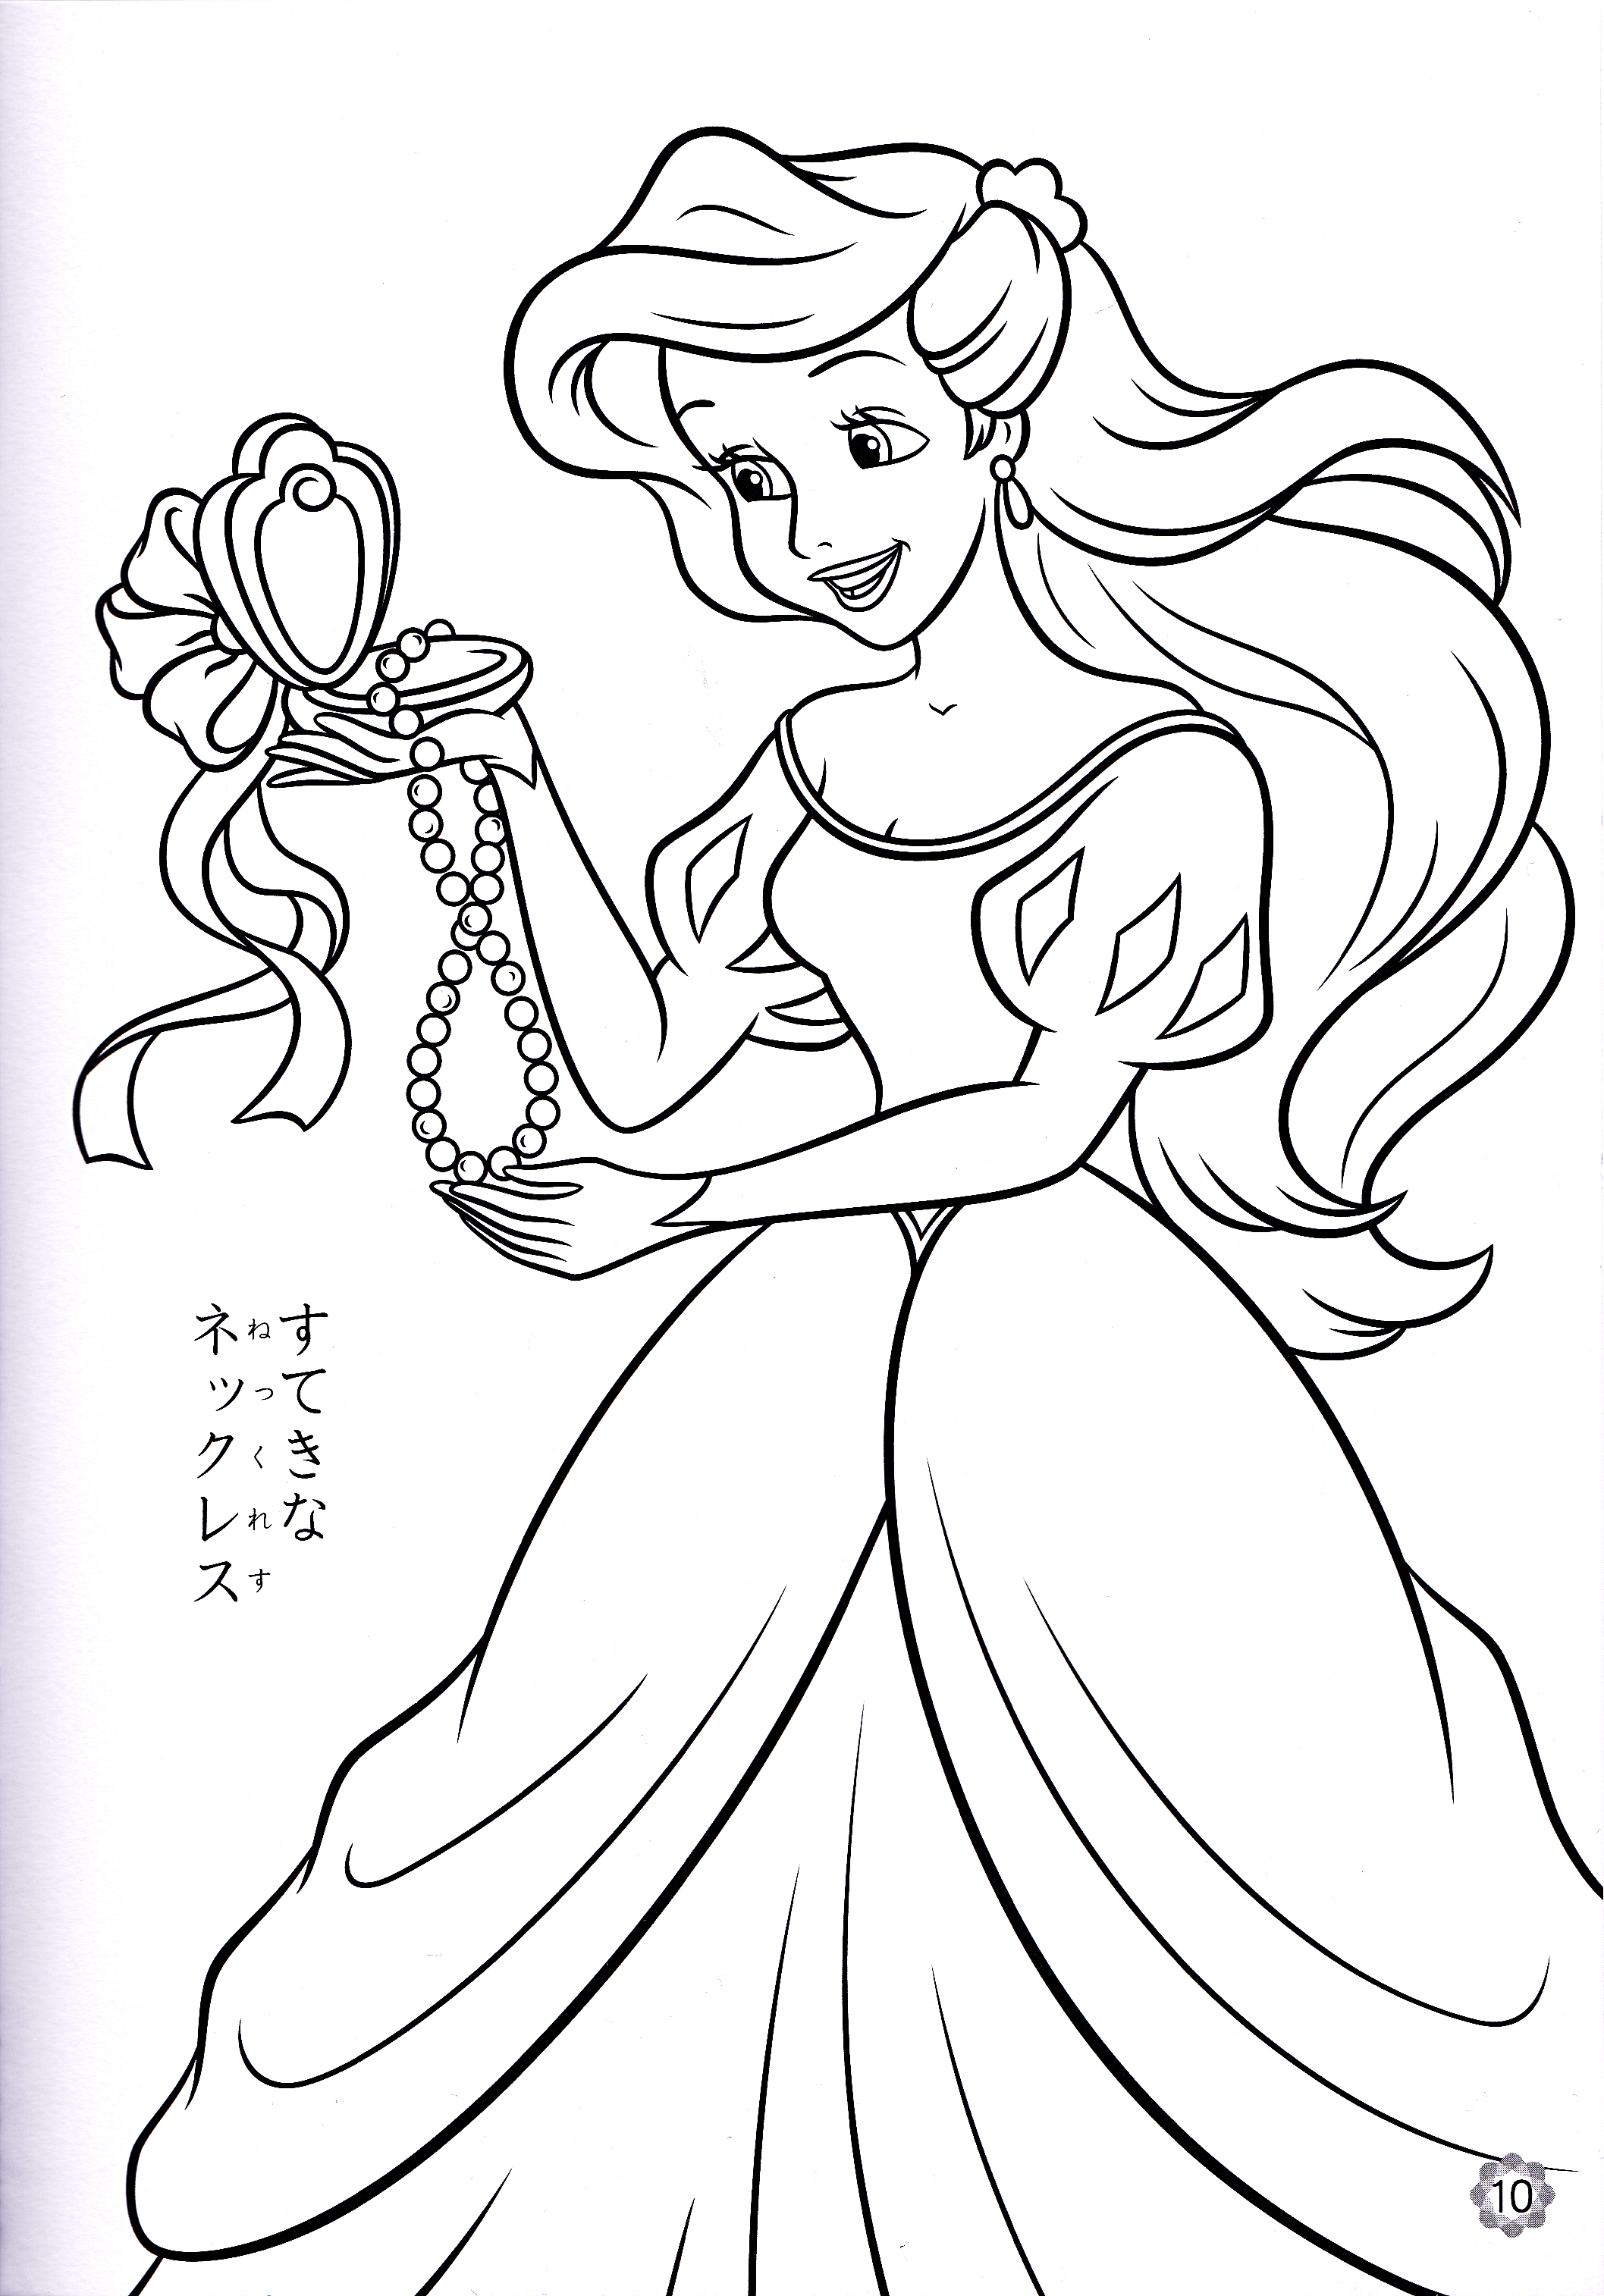 free-printable-disney-princess-coloring-pages-for-kids